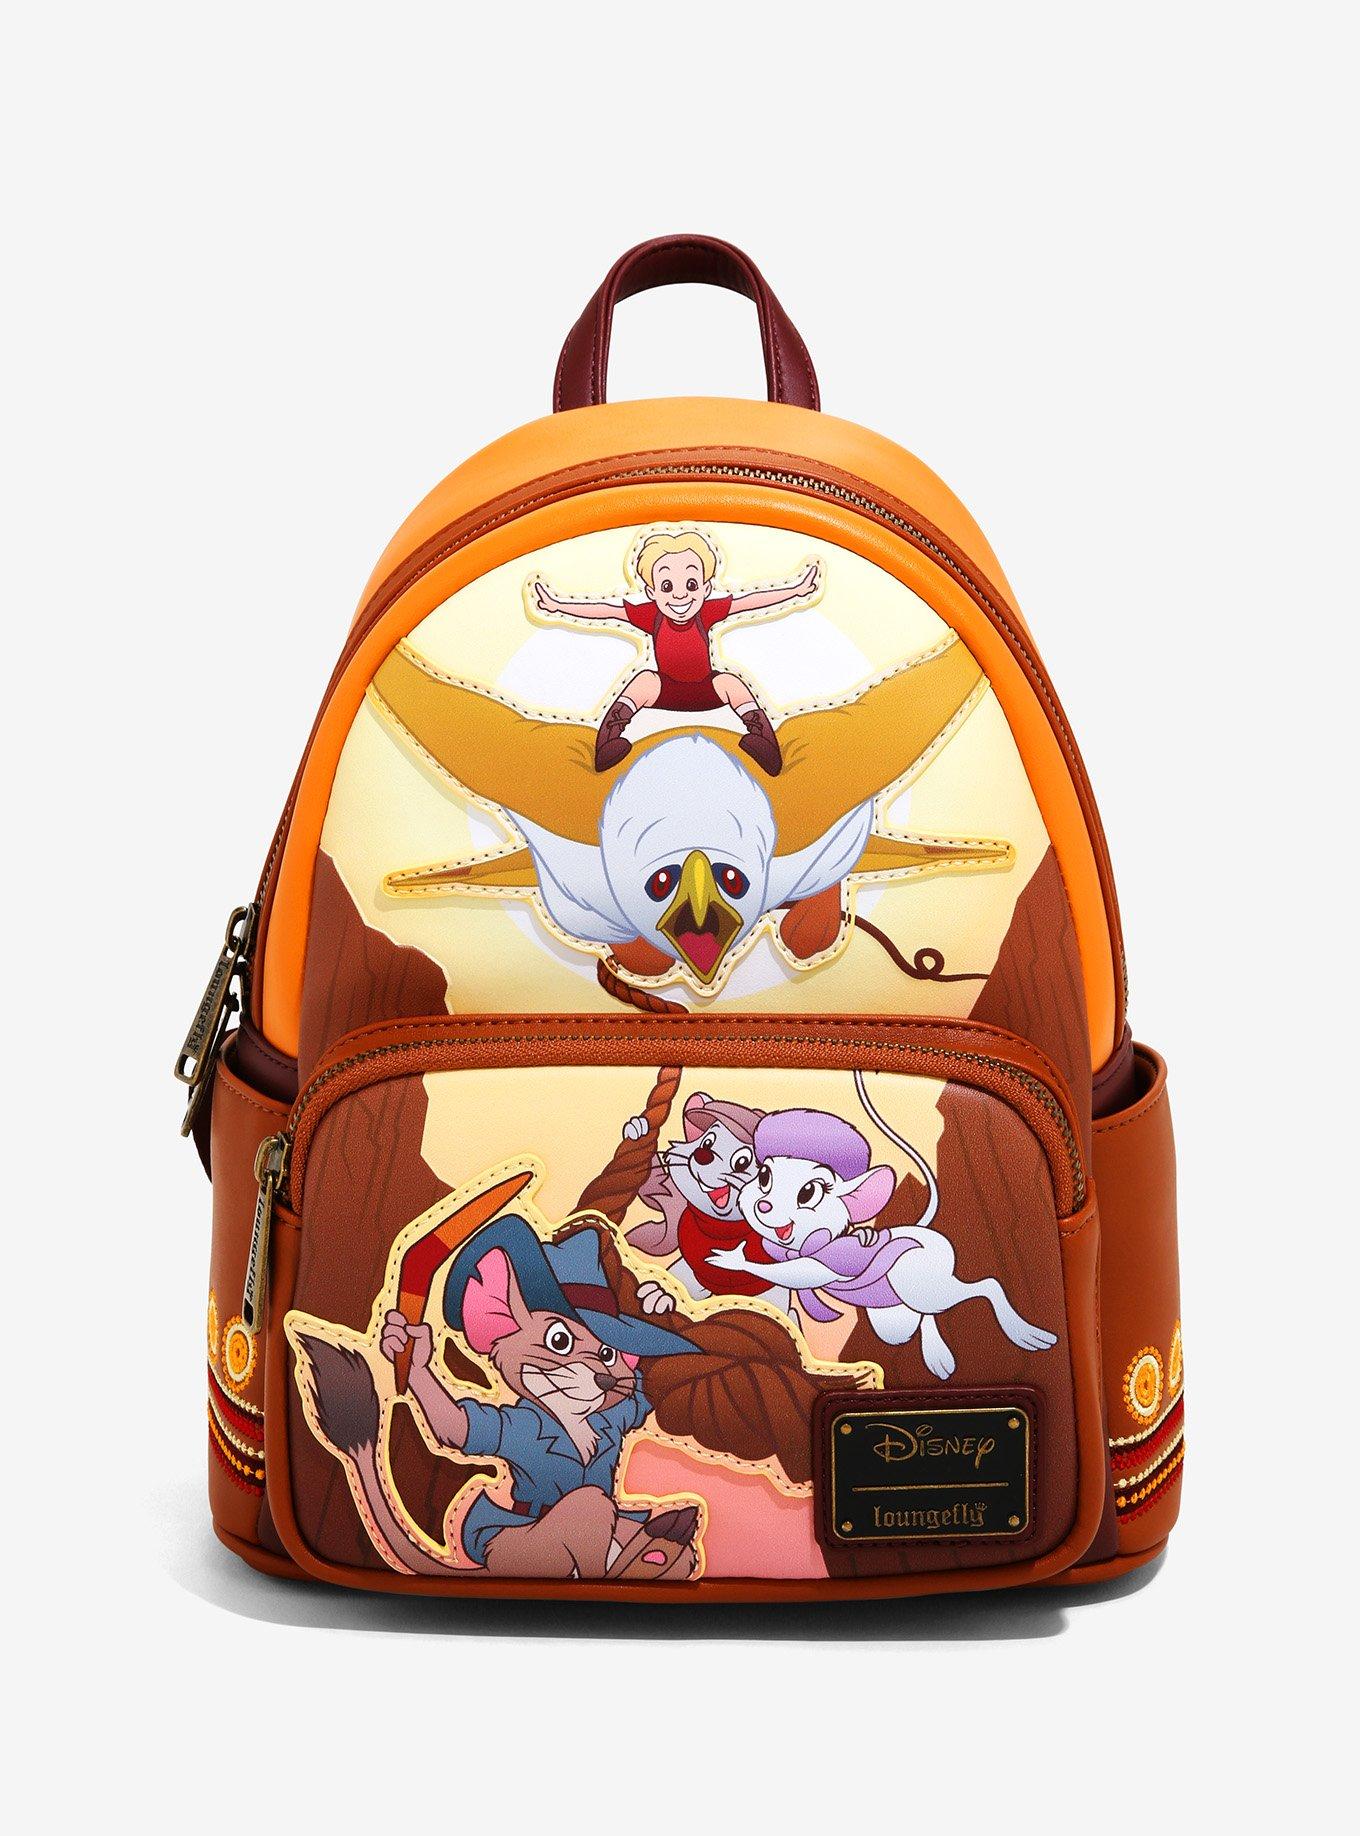 Loungefly Disney The Rescuers Canyon Mini Backpack